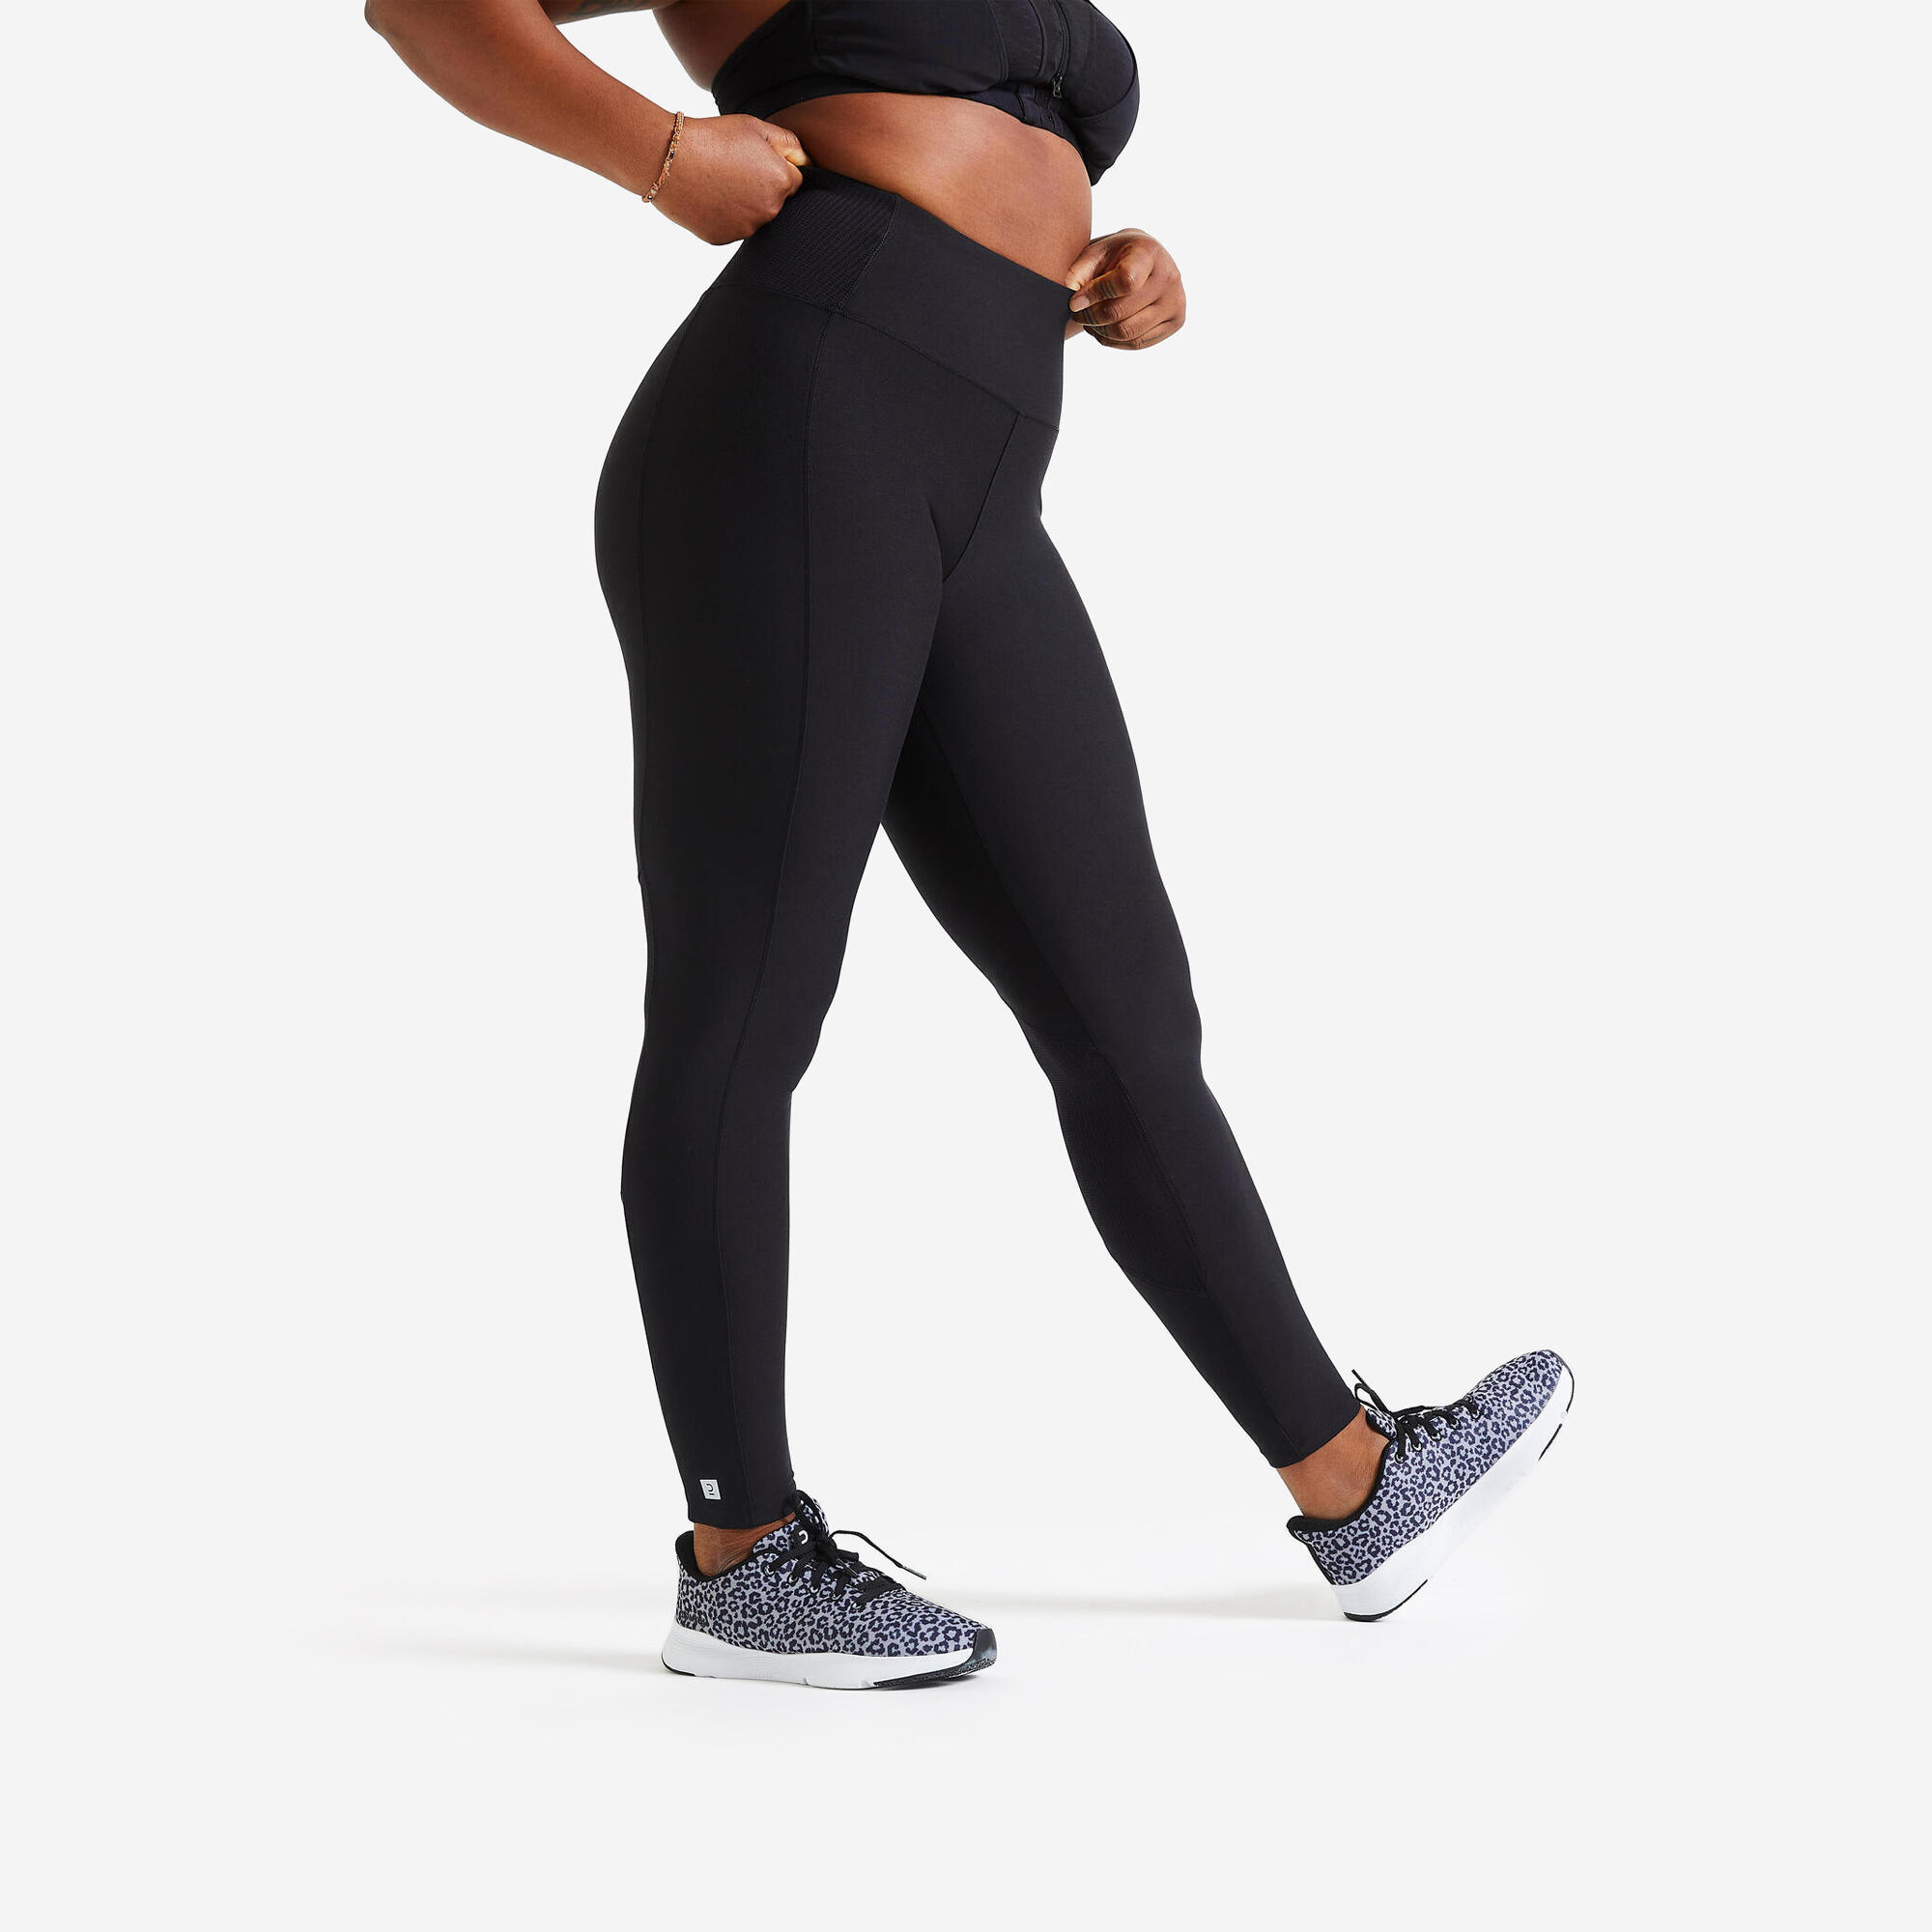 Flounce London gym running legging with drawstring waist and bum sculpt in  black